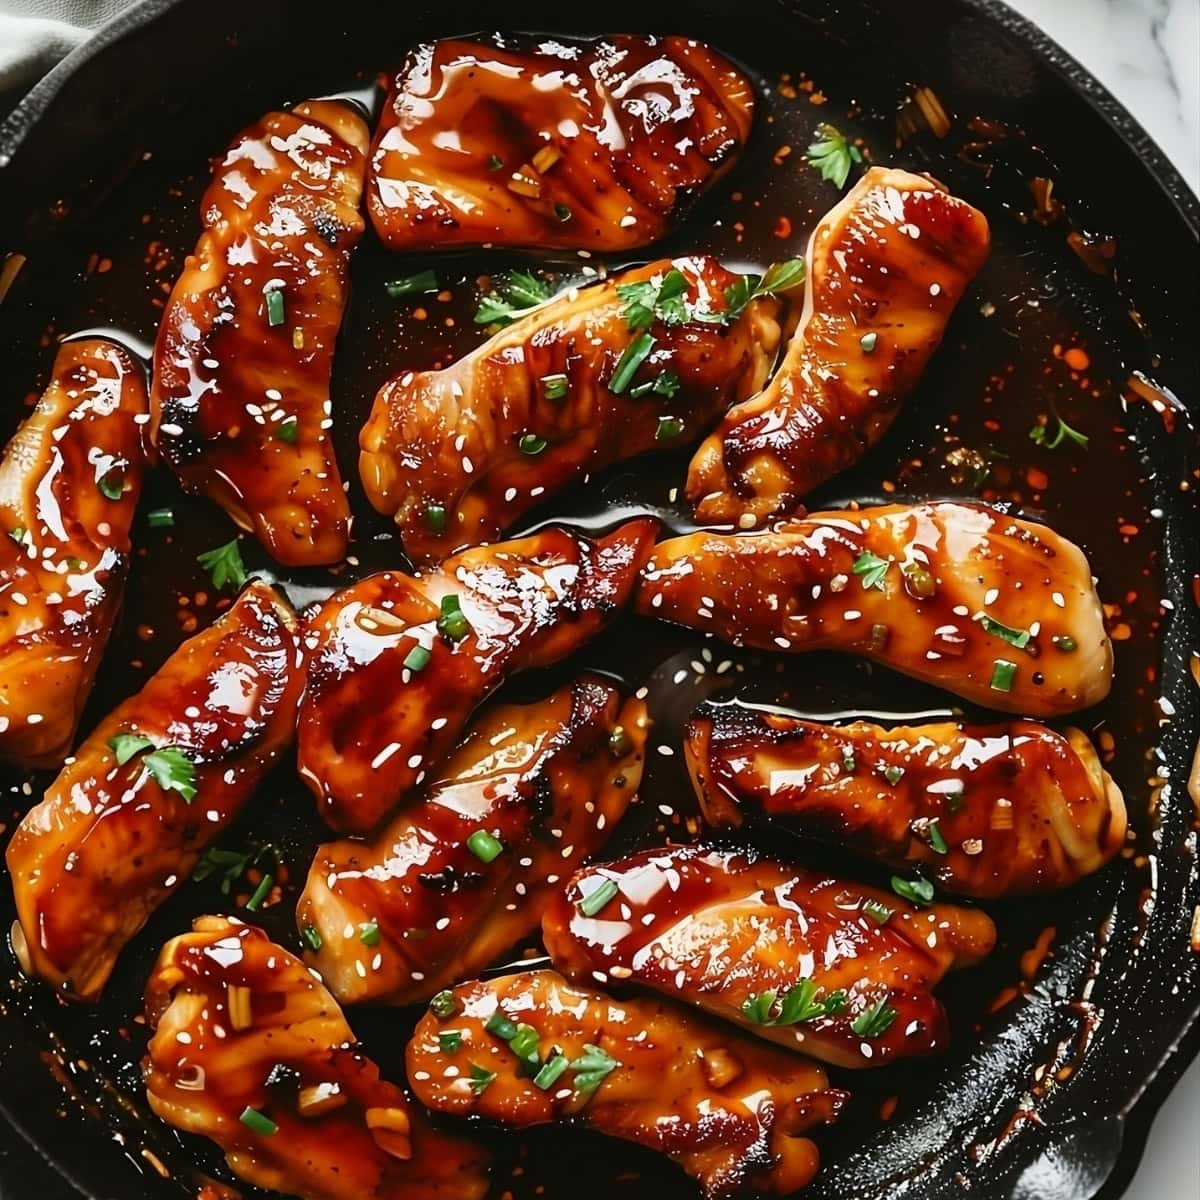 Teriyaki chicken thigh in skillet pan with sauce.